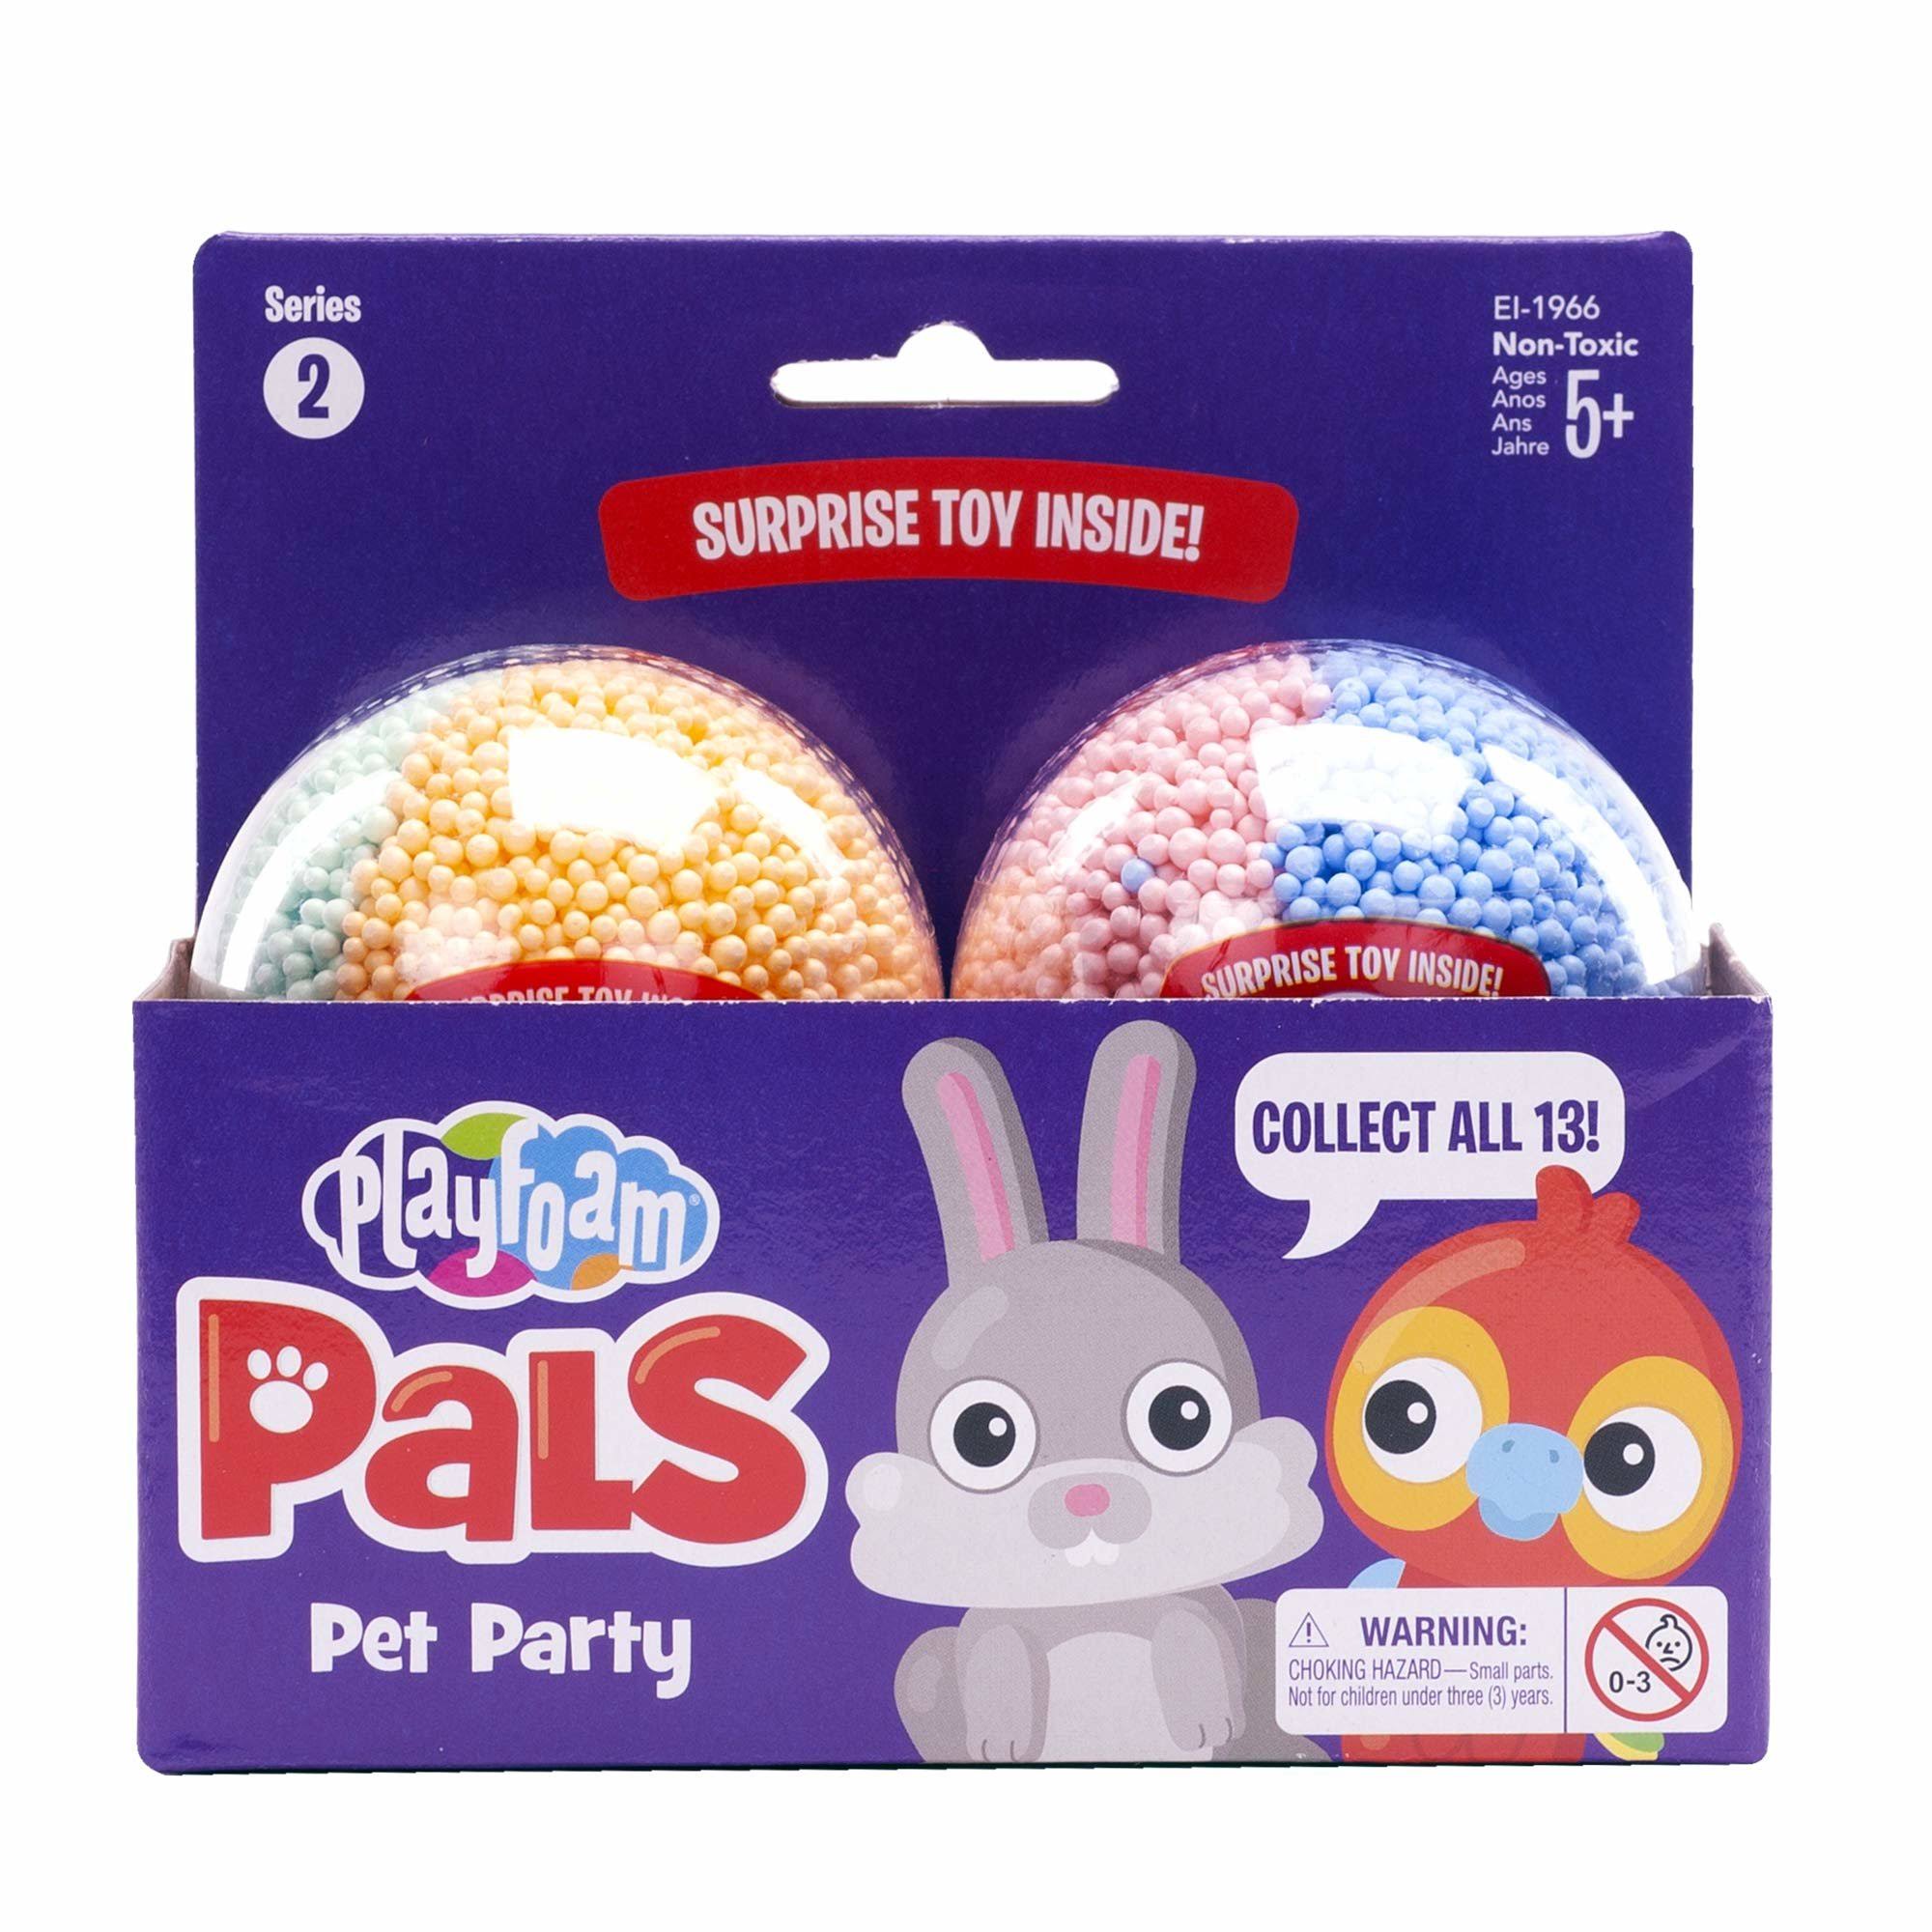 Learning Resources EI-1966 Playfoam Pals Pet Party (Series 2-2 Pack)